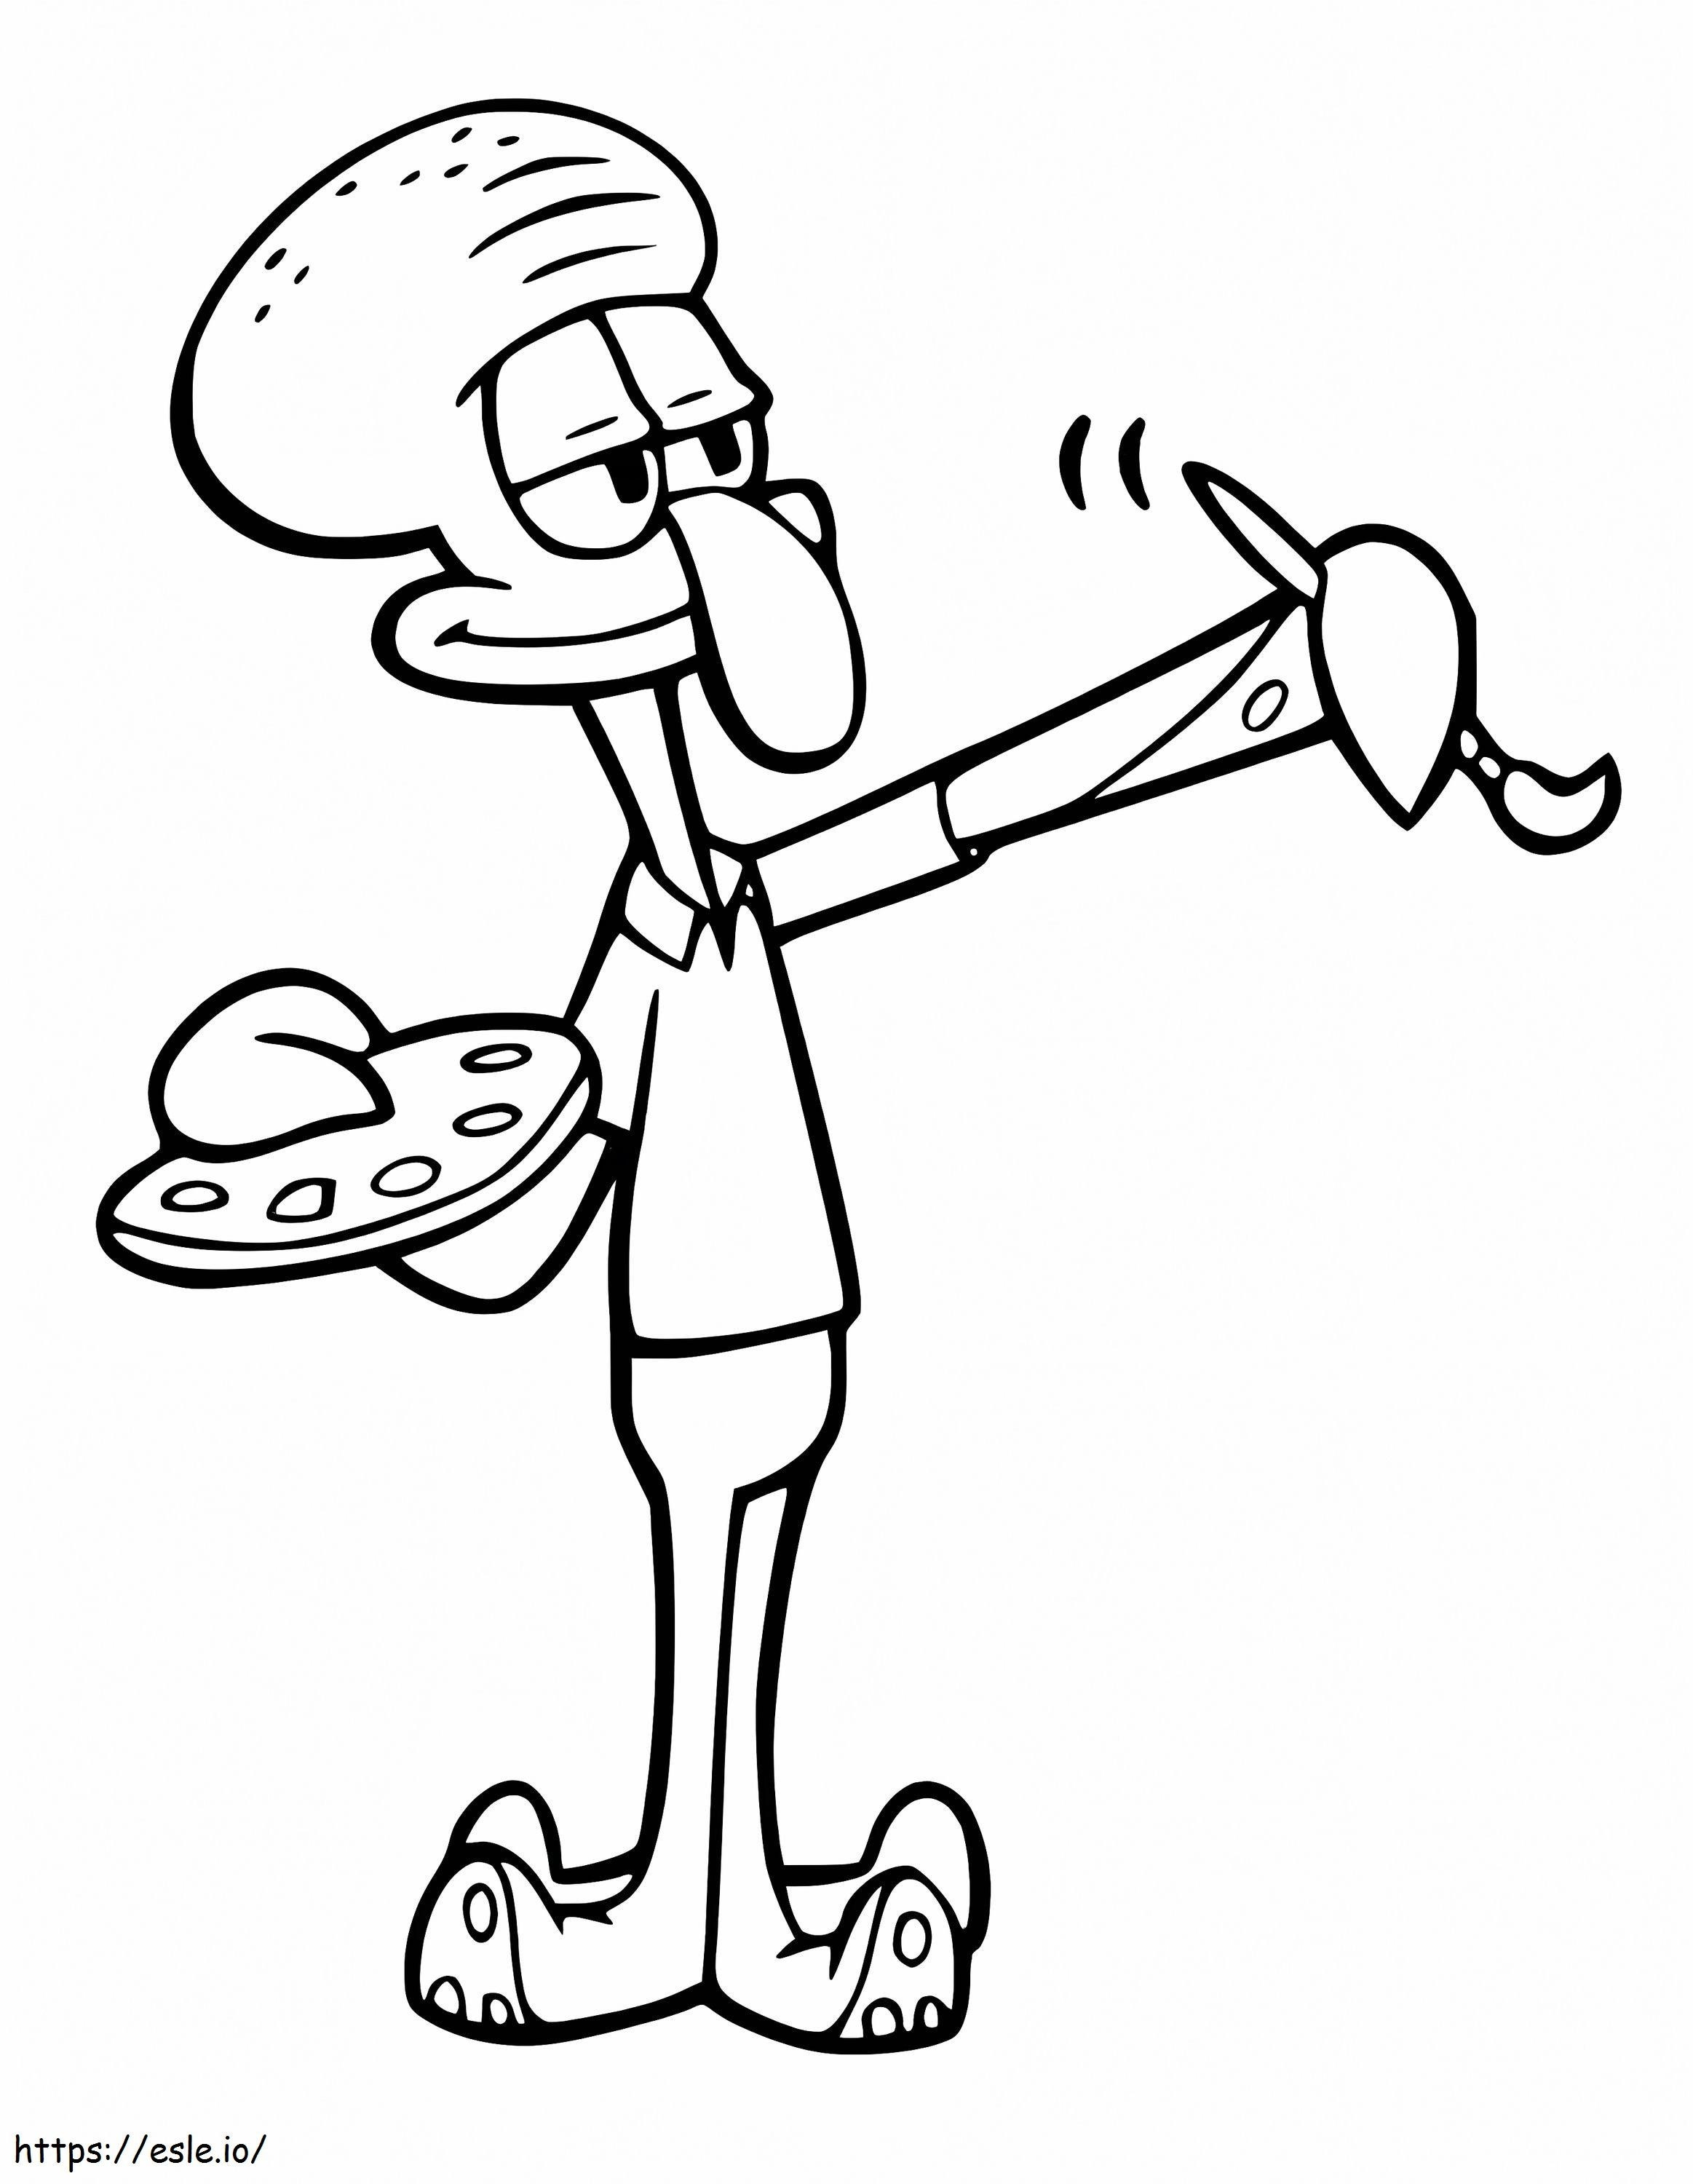 Squidward Tentacles Drawing coloring page